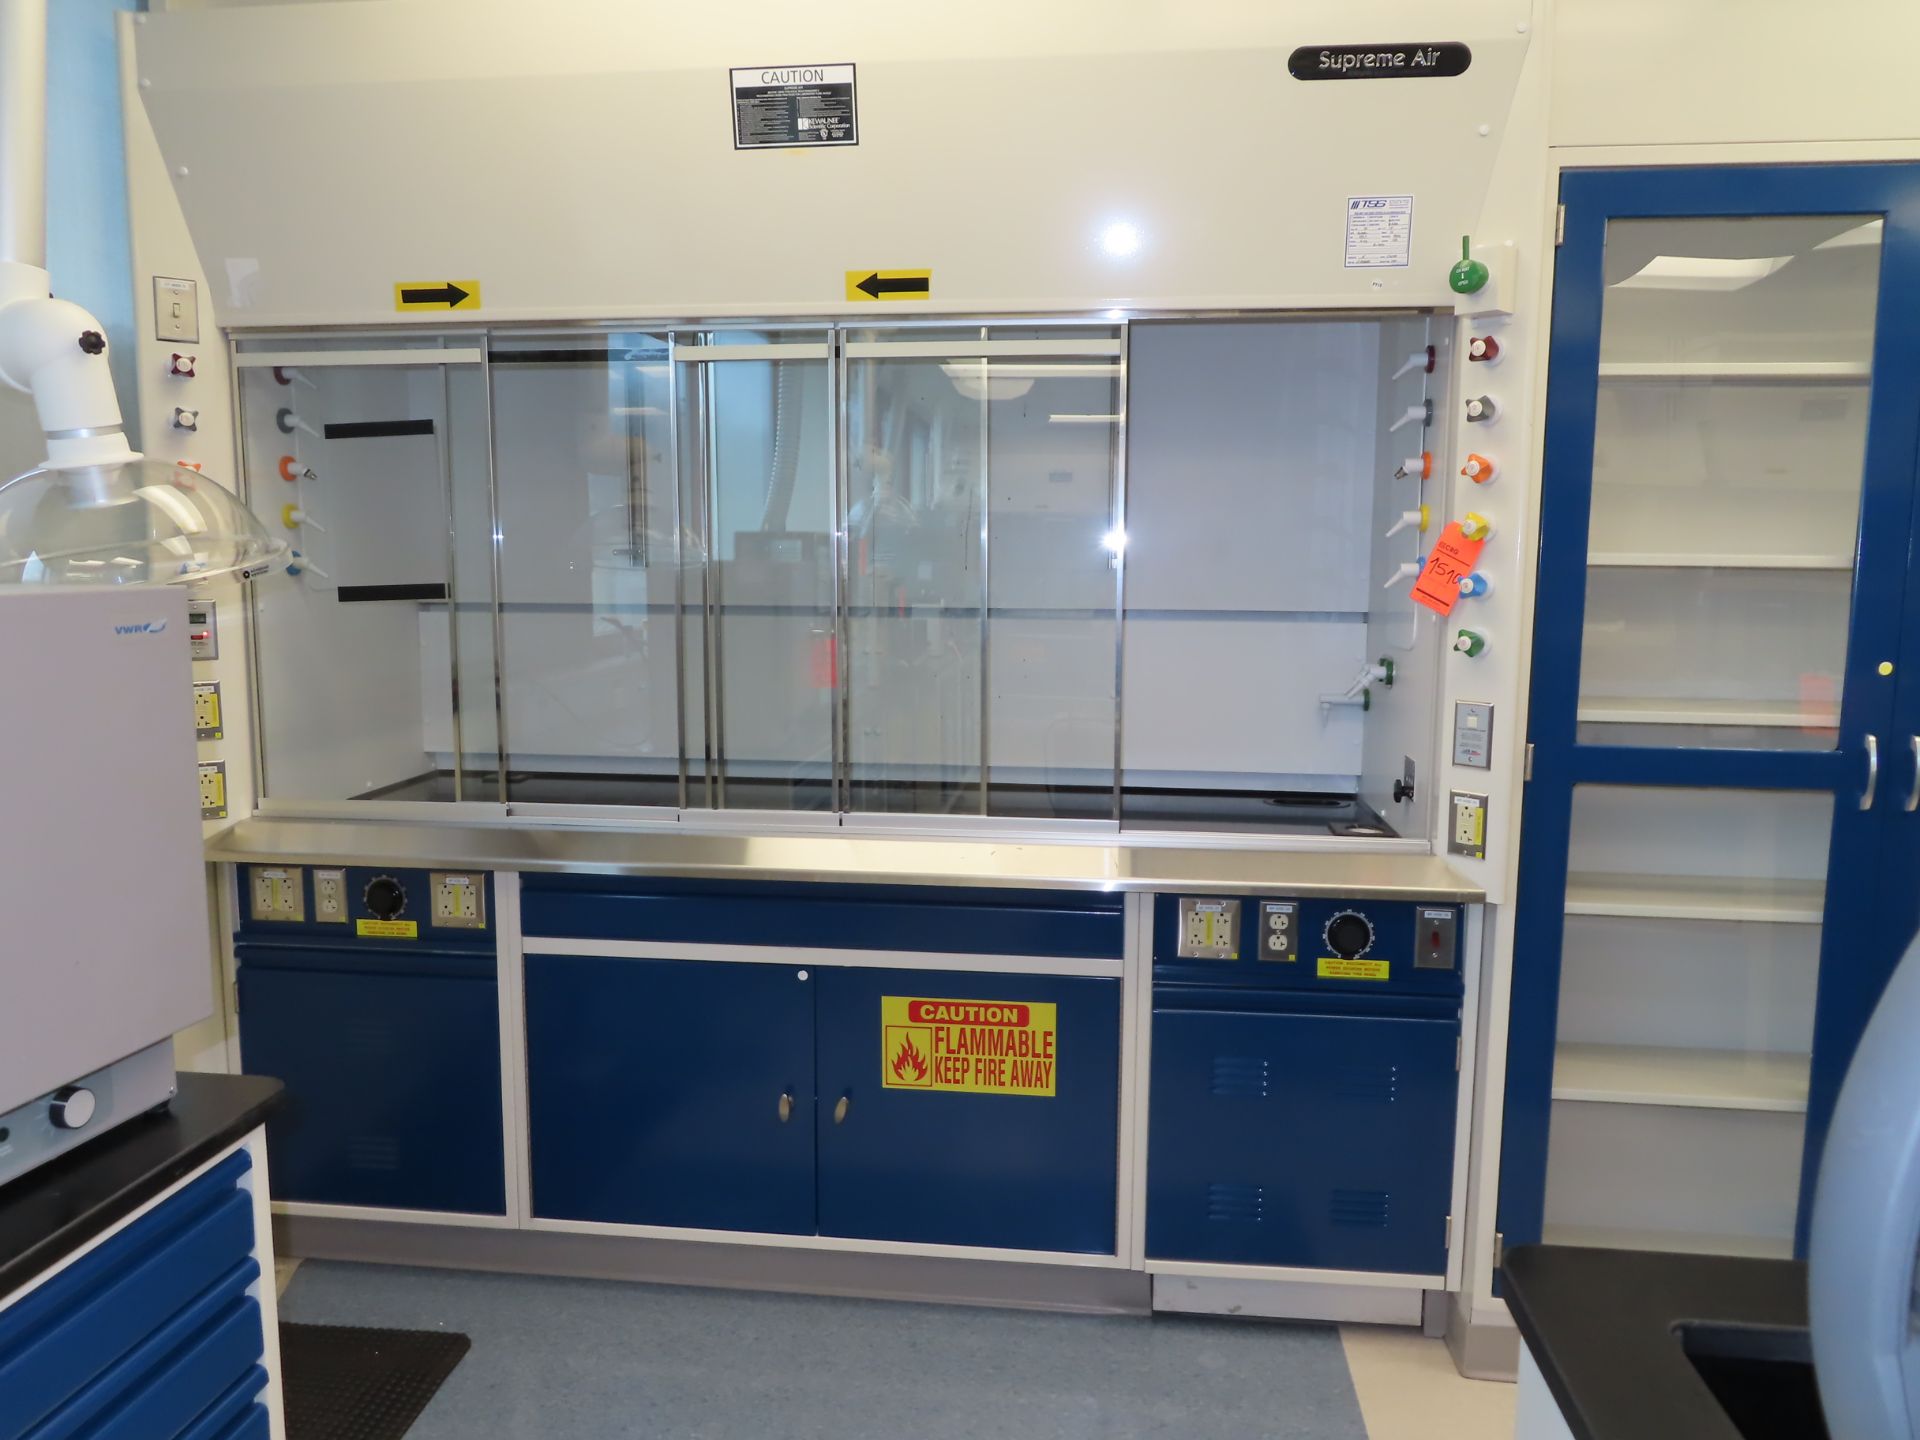 Lot of (2) Kewaunee Supreme Air fume hoods with base cabinets, 7'4" X 26", located in A Wing, 4th